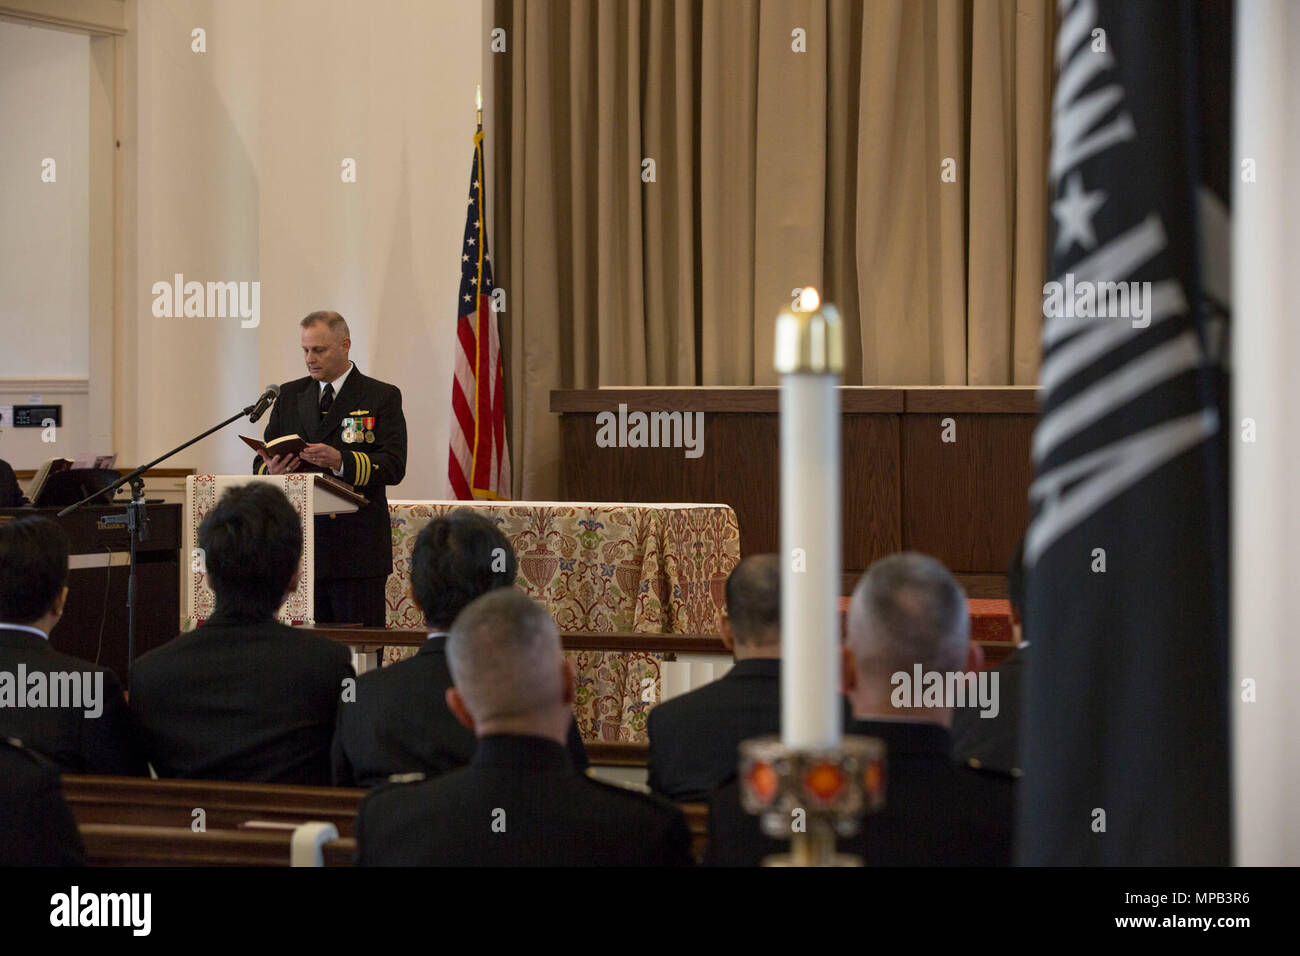 Chaplain Robert Etheridge, deputy command chaplain, Marine Corps Base Quantico, reads scripture during the memorial service of retired U.S. Marine Corps Lt. Gen. Lawrence F. Snowden at the U.S. Marine Memorial Chapel, Quantico, Va., April 8, 2017. Snowden retired in 1979 after nearly 40 years of service, fought in engagements during World War II, the Korean War, and Vietnam. He passed away Feb. 18, 2017. He was prominently known after retirement for organizing joint 'Reunion of Honor' missions which is an opportunity for Japanese and U.S. veterans and their families, dignitaries, leaders and s Stock Photo